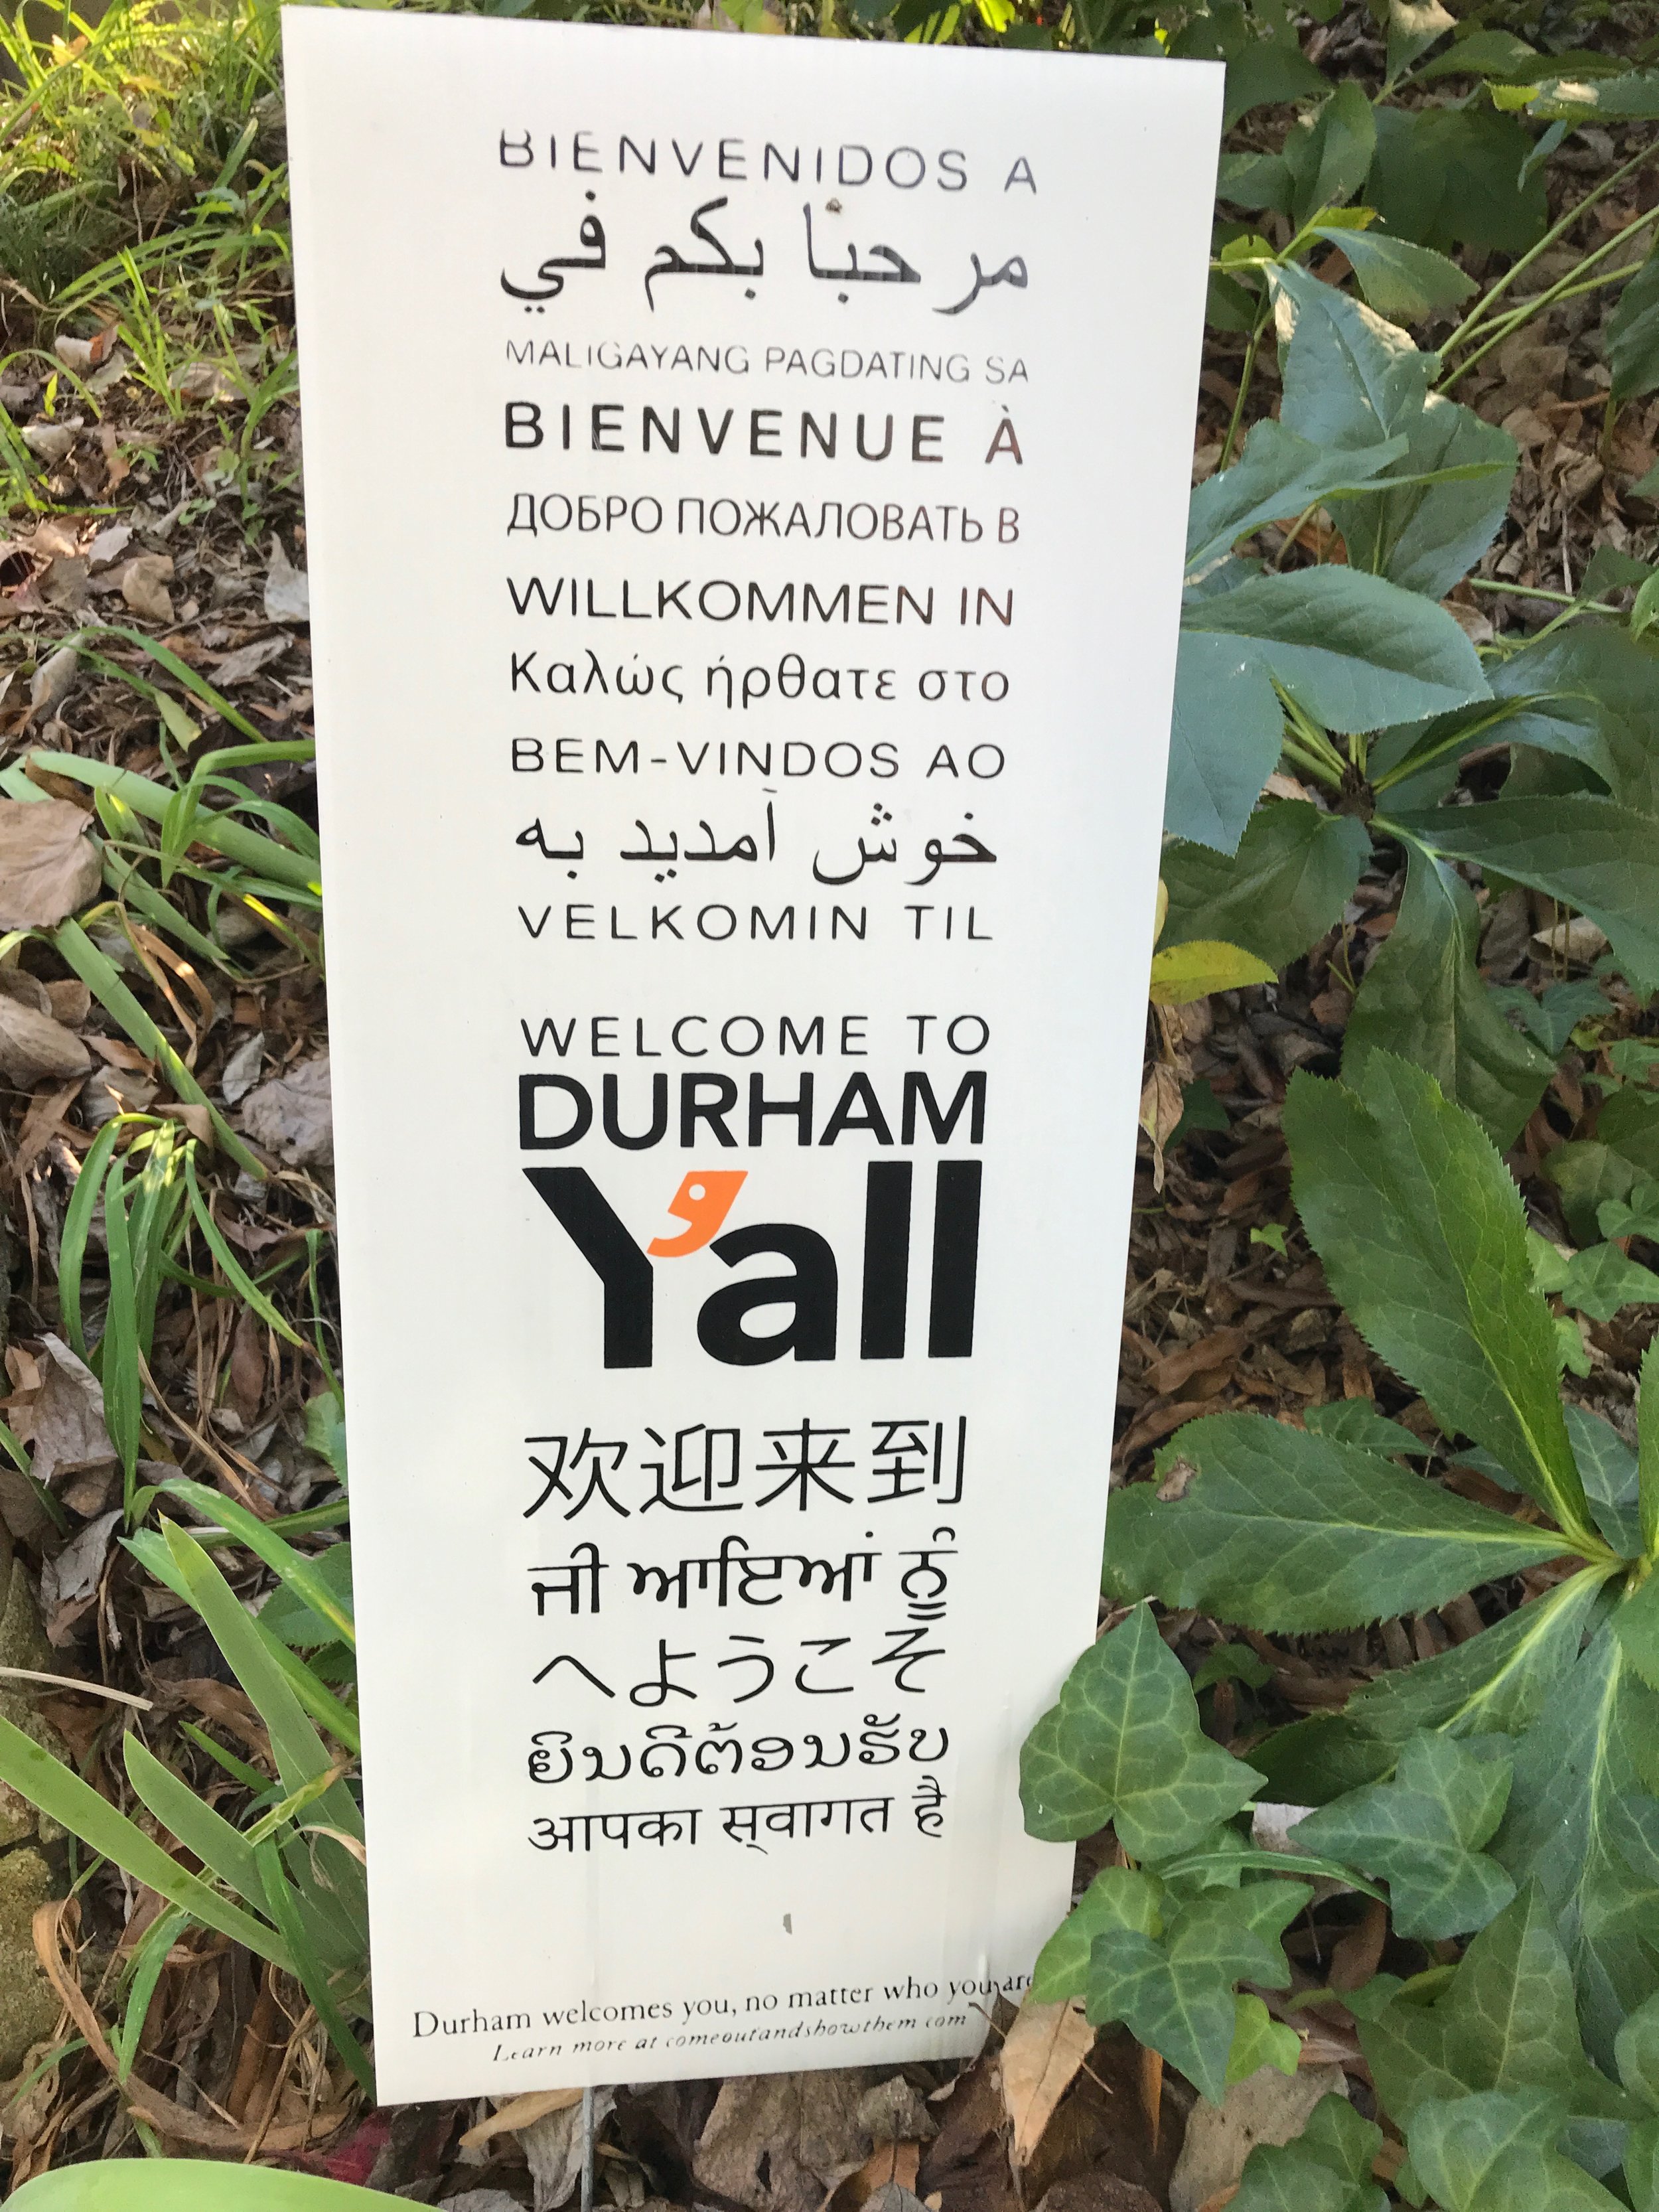 Image: Photo of banner that has text of greetings in many different languages